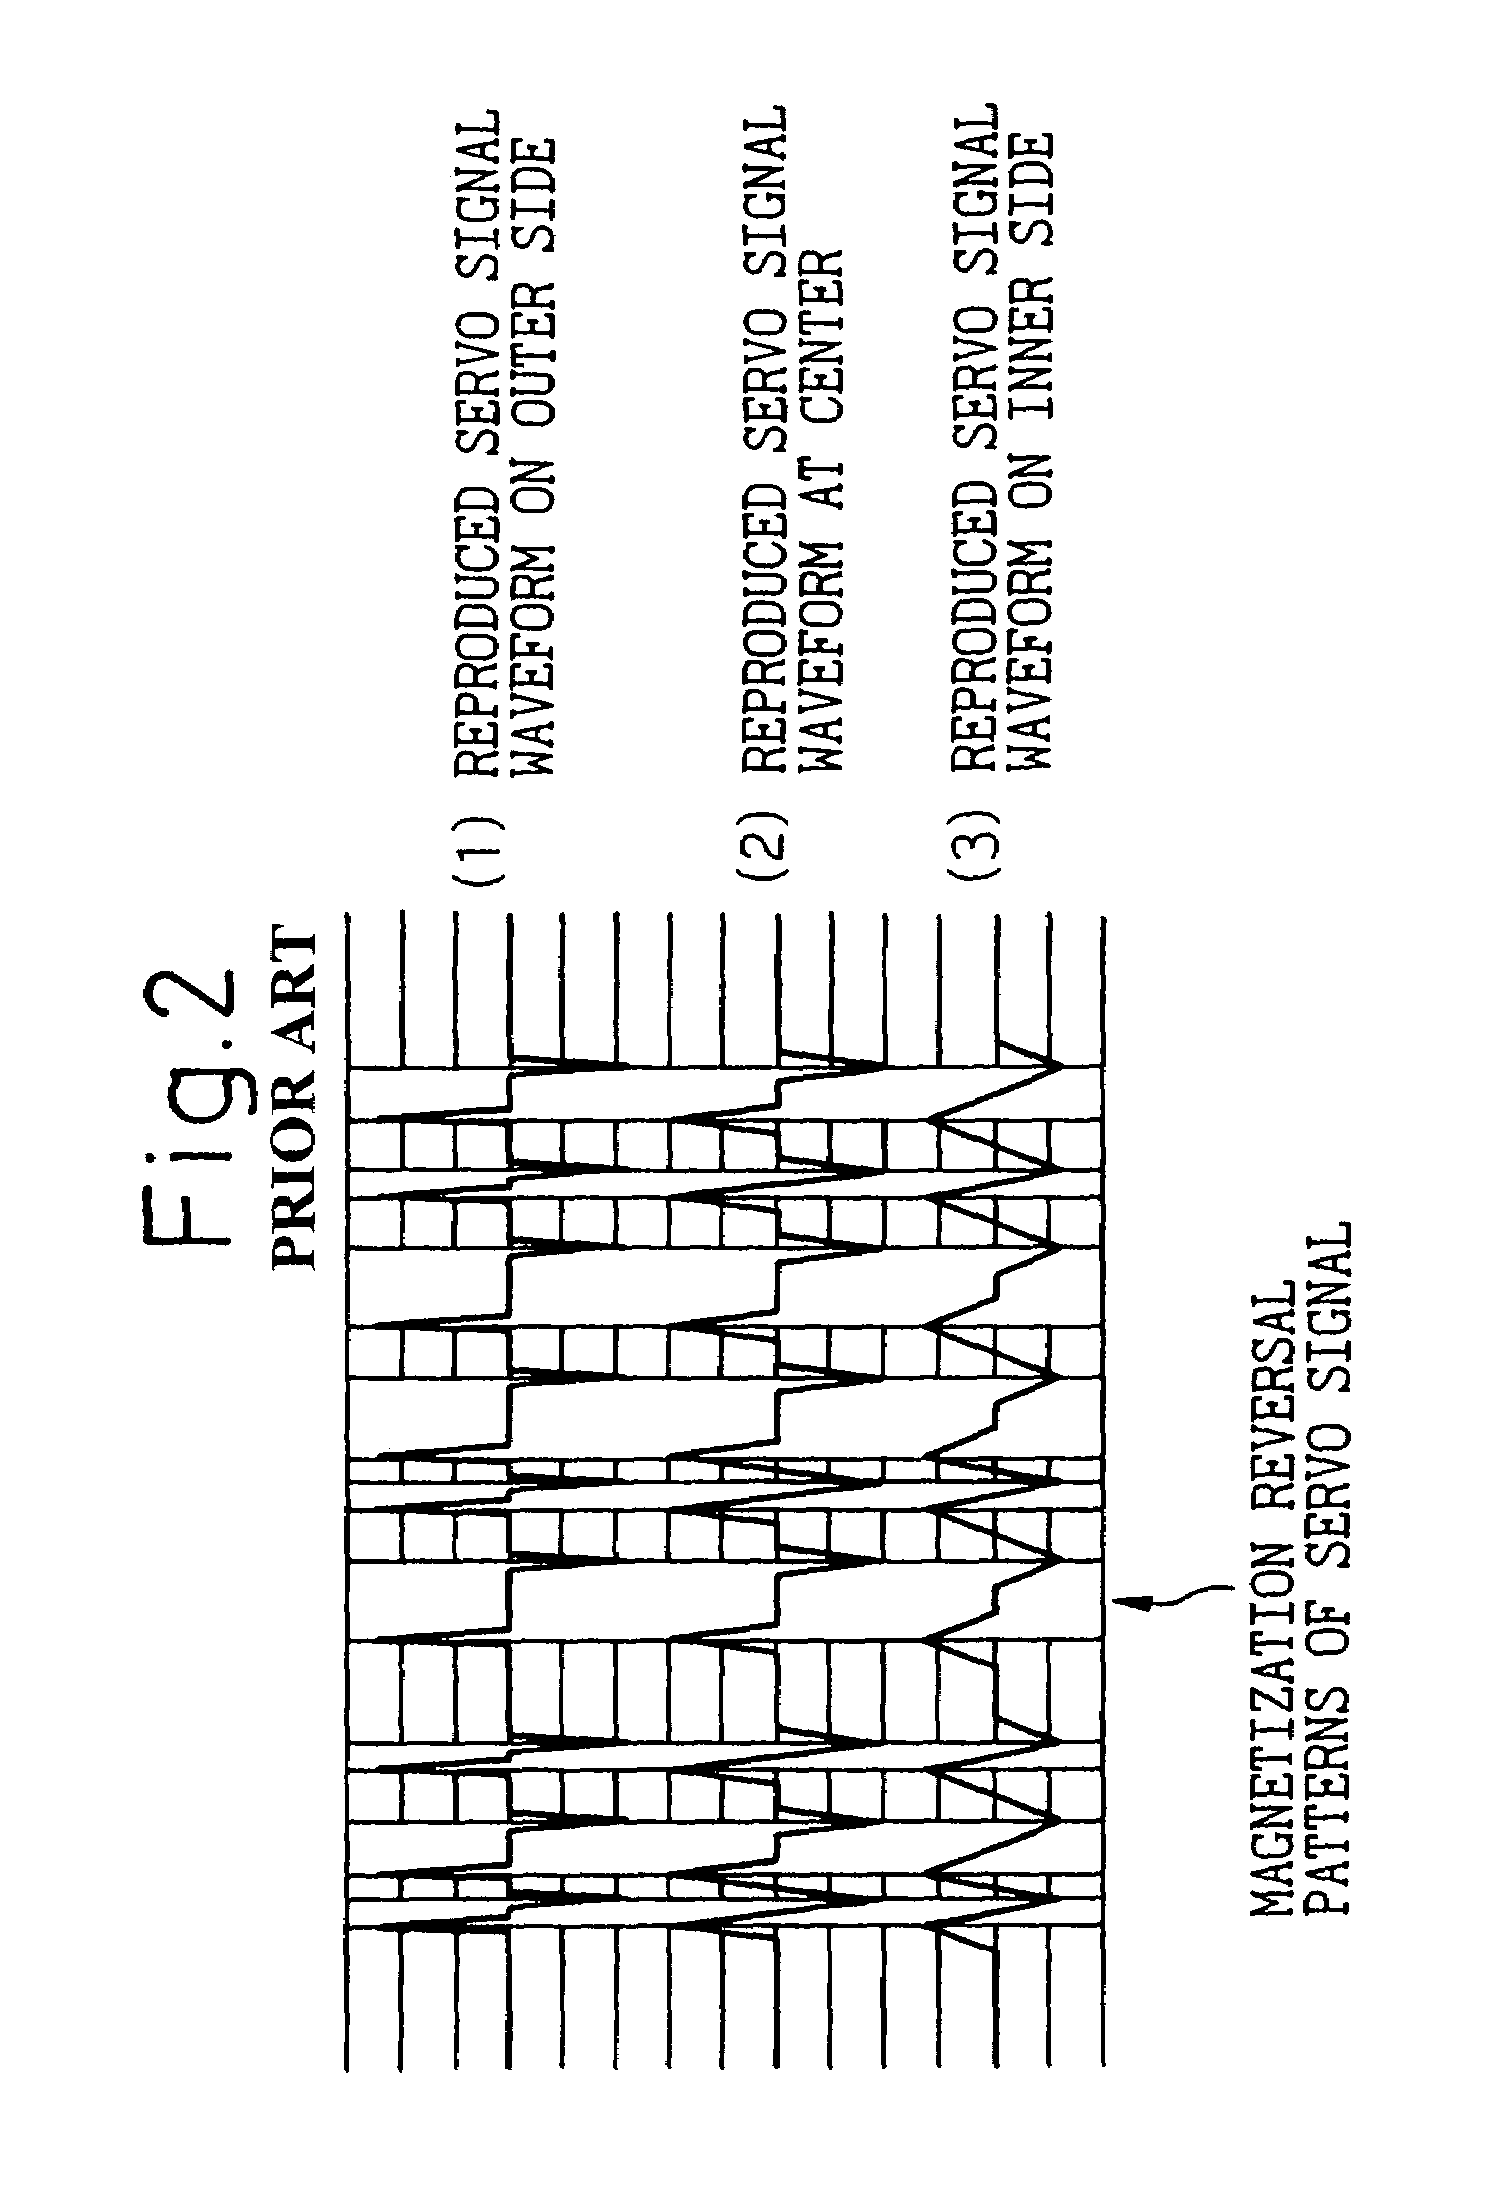 Disk device and disk medium, in which a plurality of servo cylinders formed concentrically from the inner diametrical portion to the outer diametrical portion of at least one disk are divided into predetermined areas